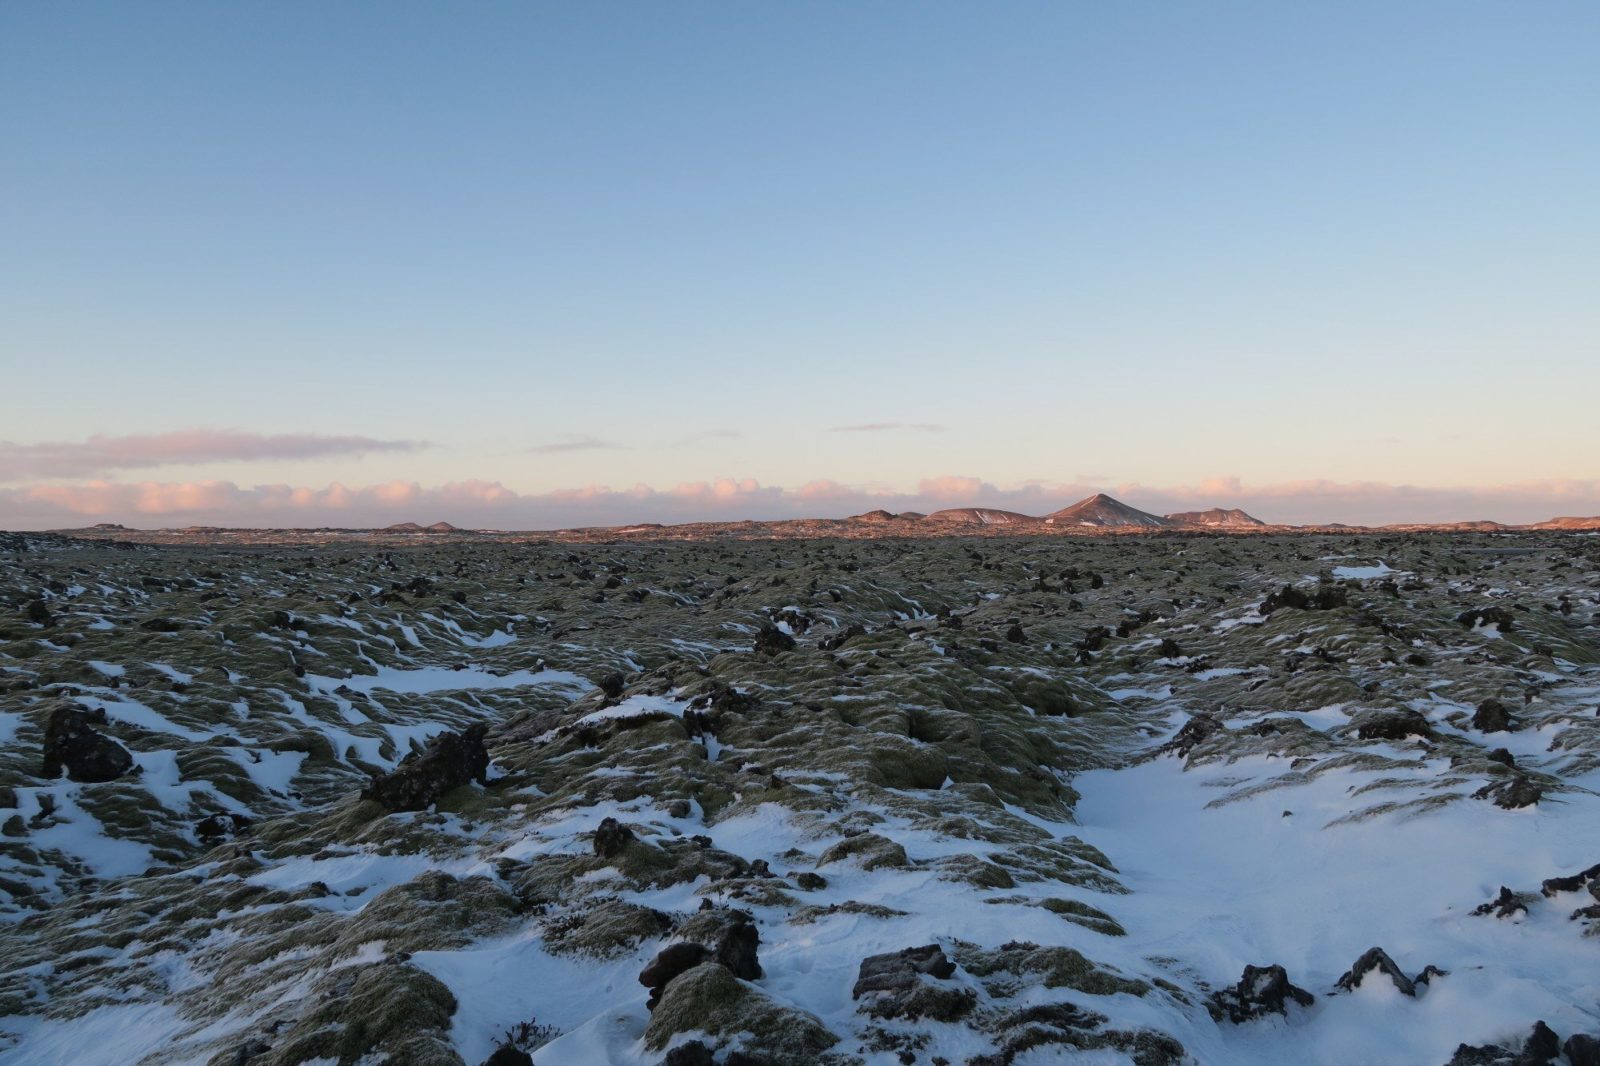 In case you were wondering, this is Iceland in winter.